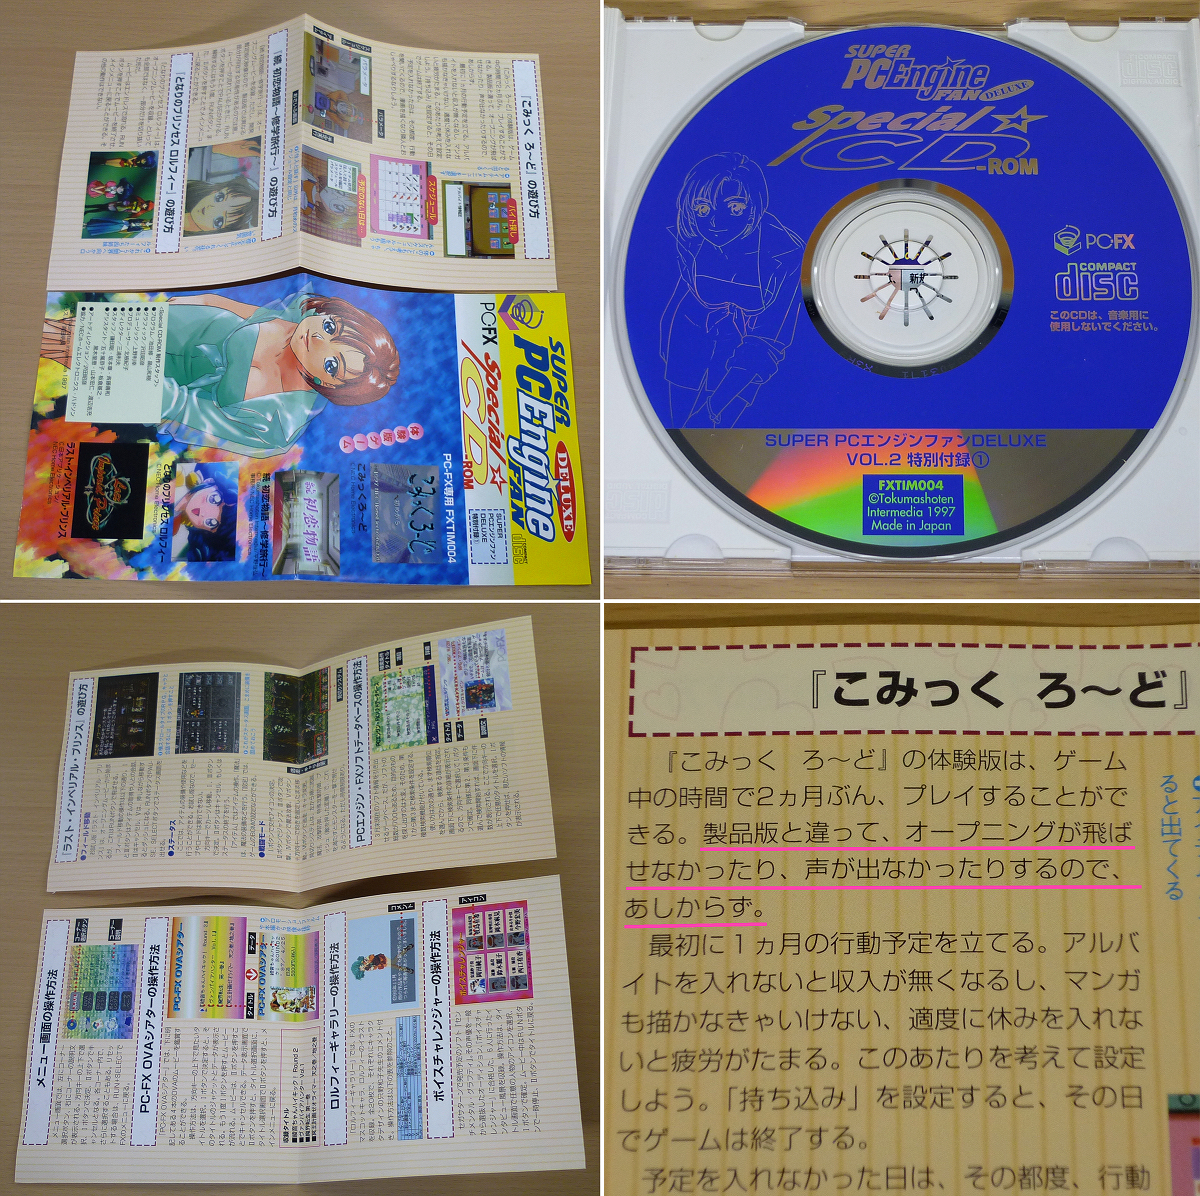 SUPER PC-Engine FAN DELUXE Special ☆ CD-ROM vol.1 vol.2 vol.3 / Japanese magazine supplementsの画像2